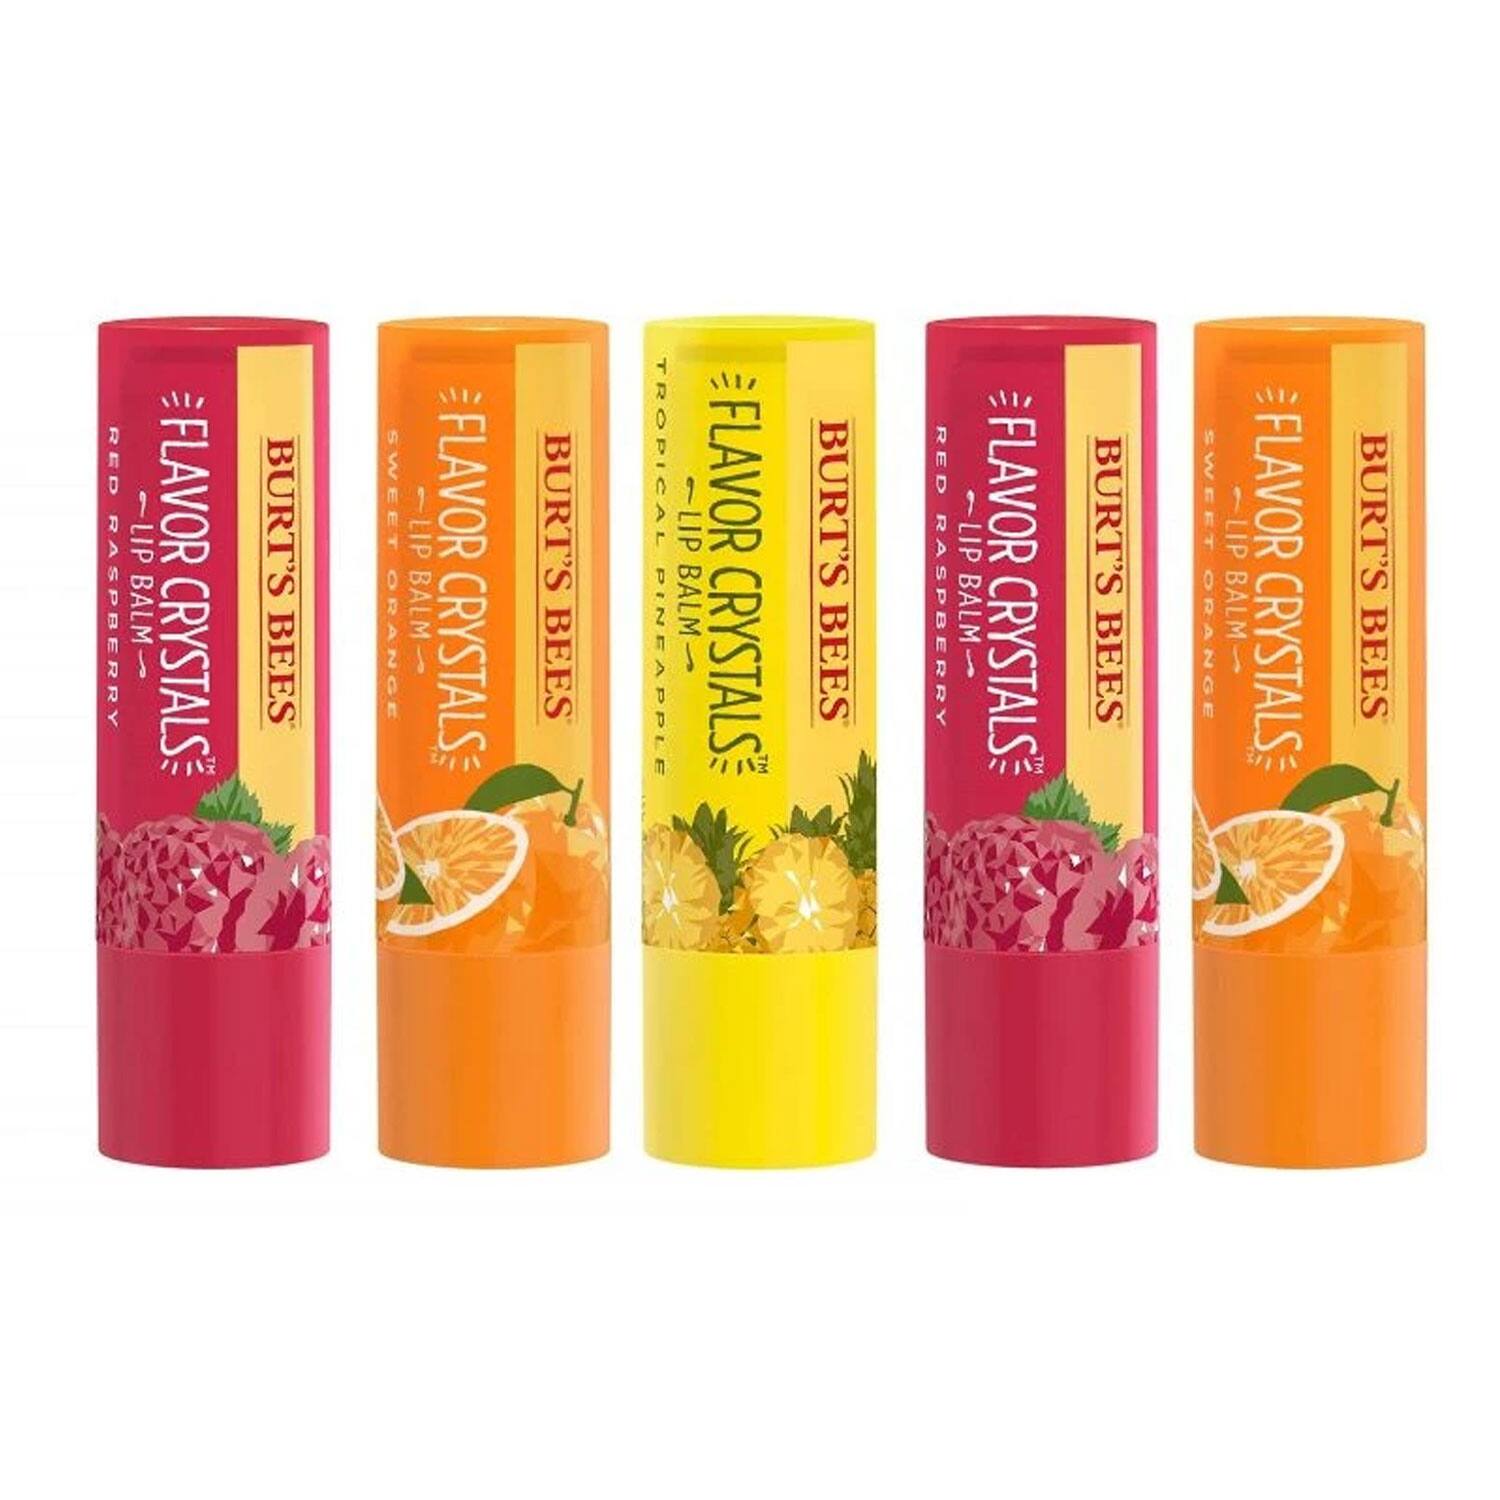 5 Pack Burt's Bees Natural Lip Balm for $9.74 + Free Shipping